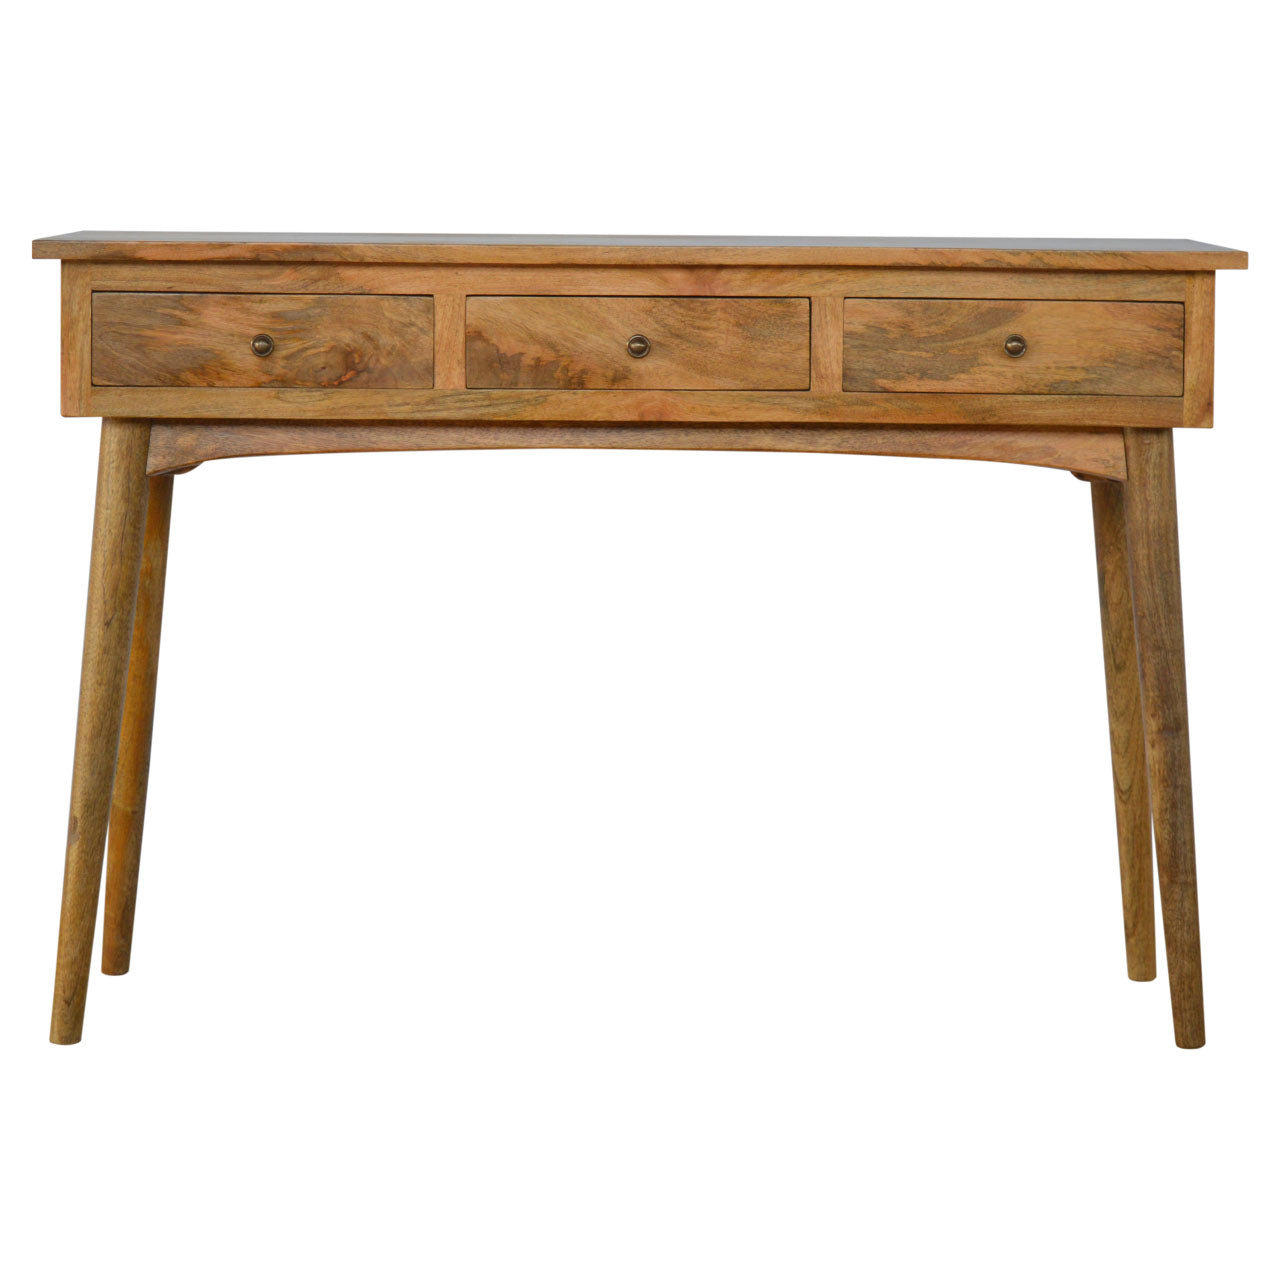 Elegant Solid wood Nordic style console table with three drawers